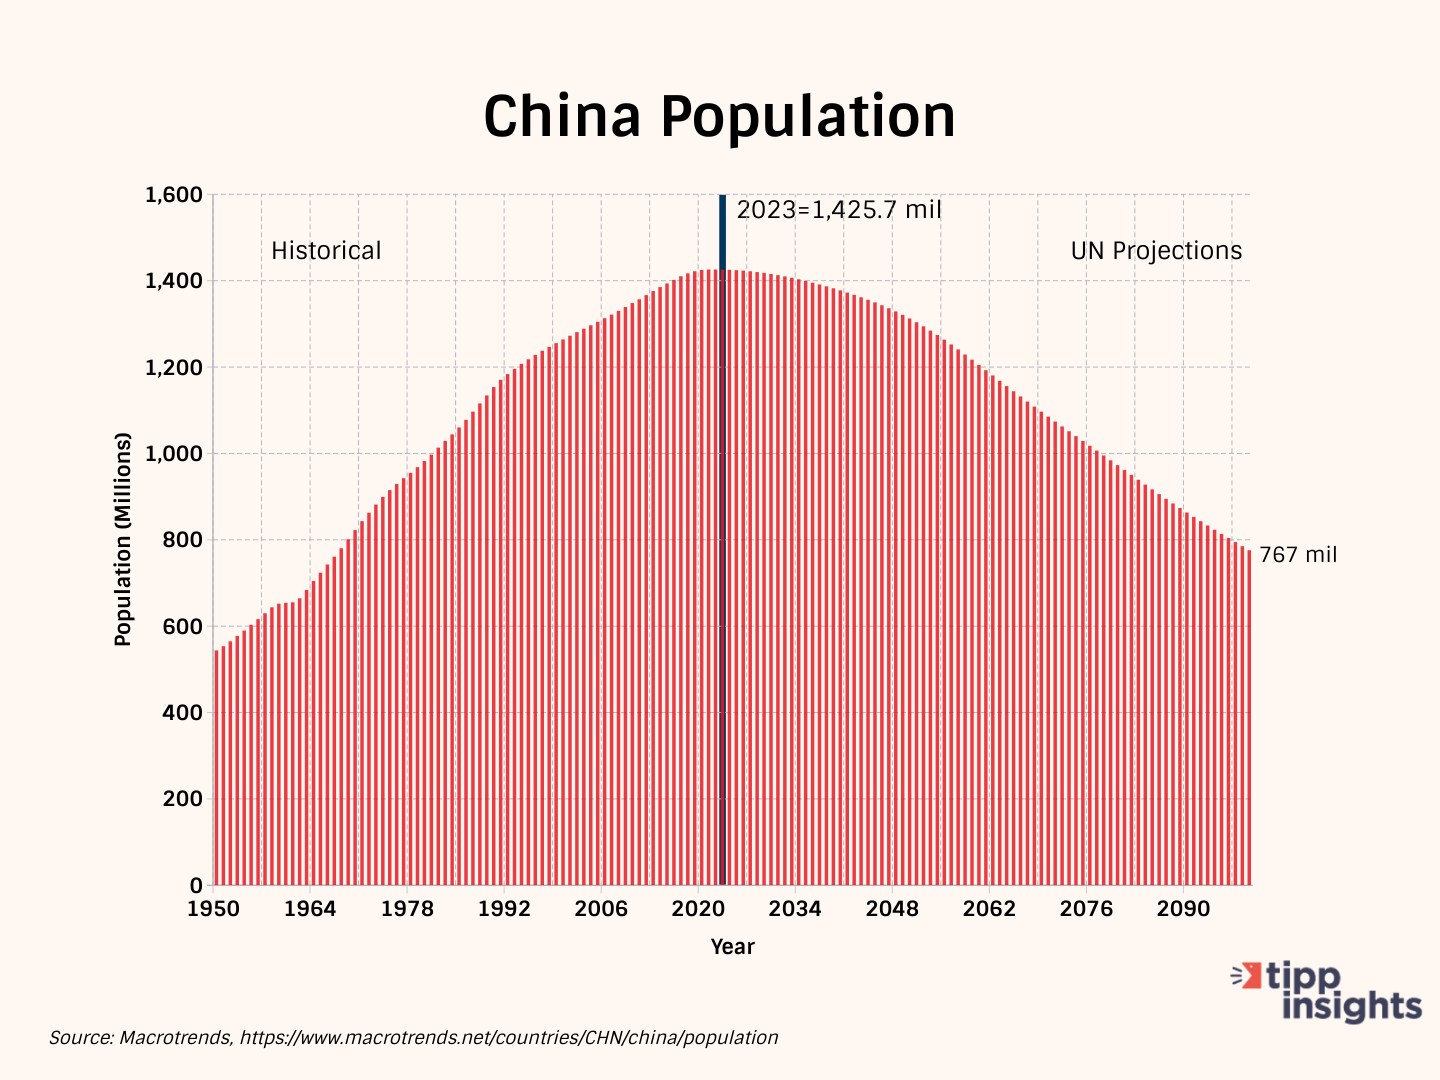 Chinese Demographic Crisis - A Result Of Beijing’s Policies